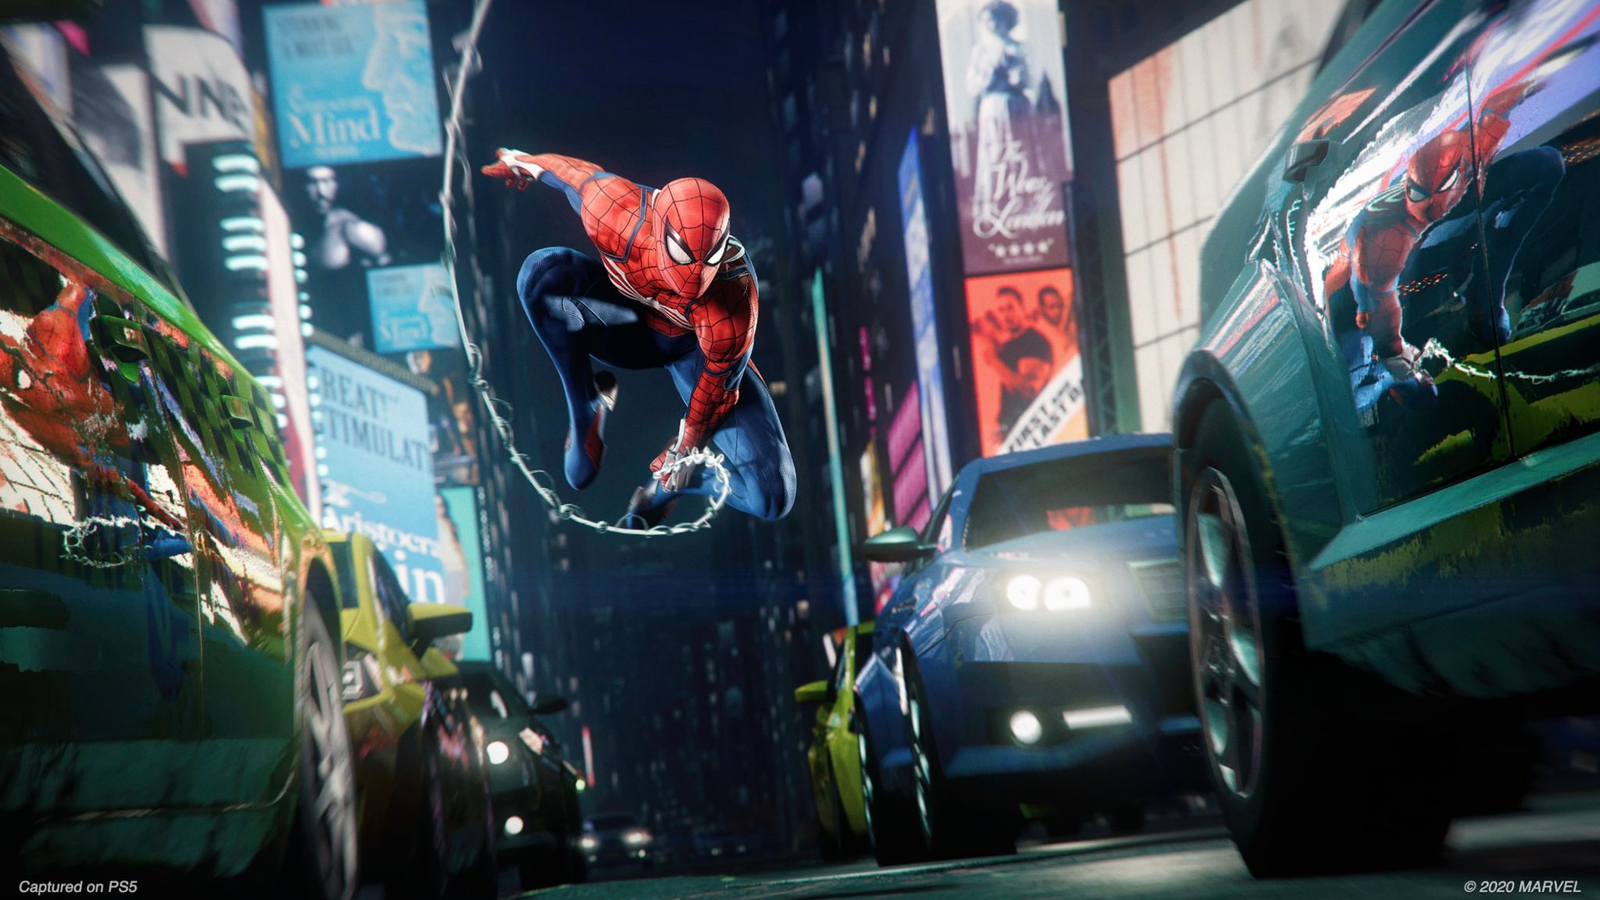 Spider-Man Remastered Compared to PS4 Pro Version in New Video